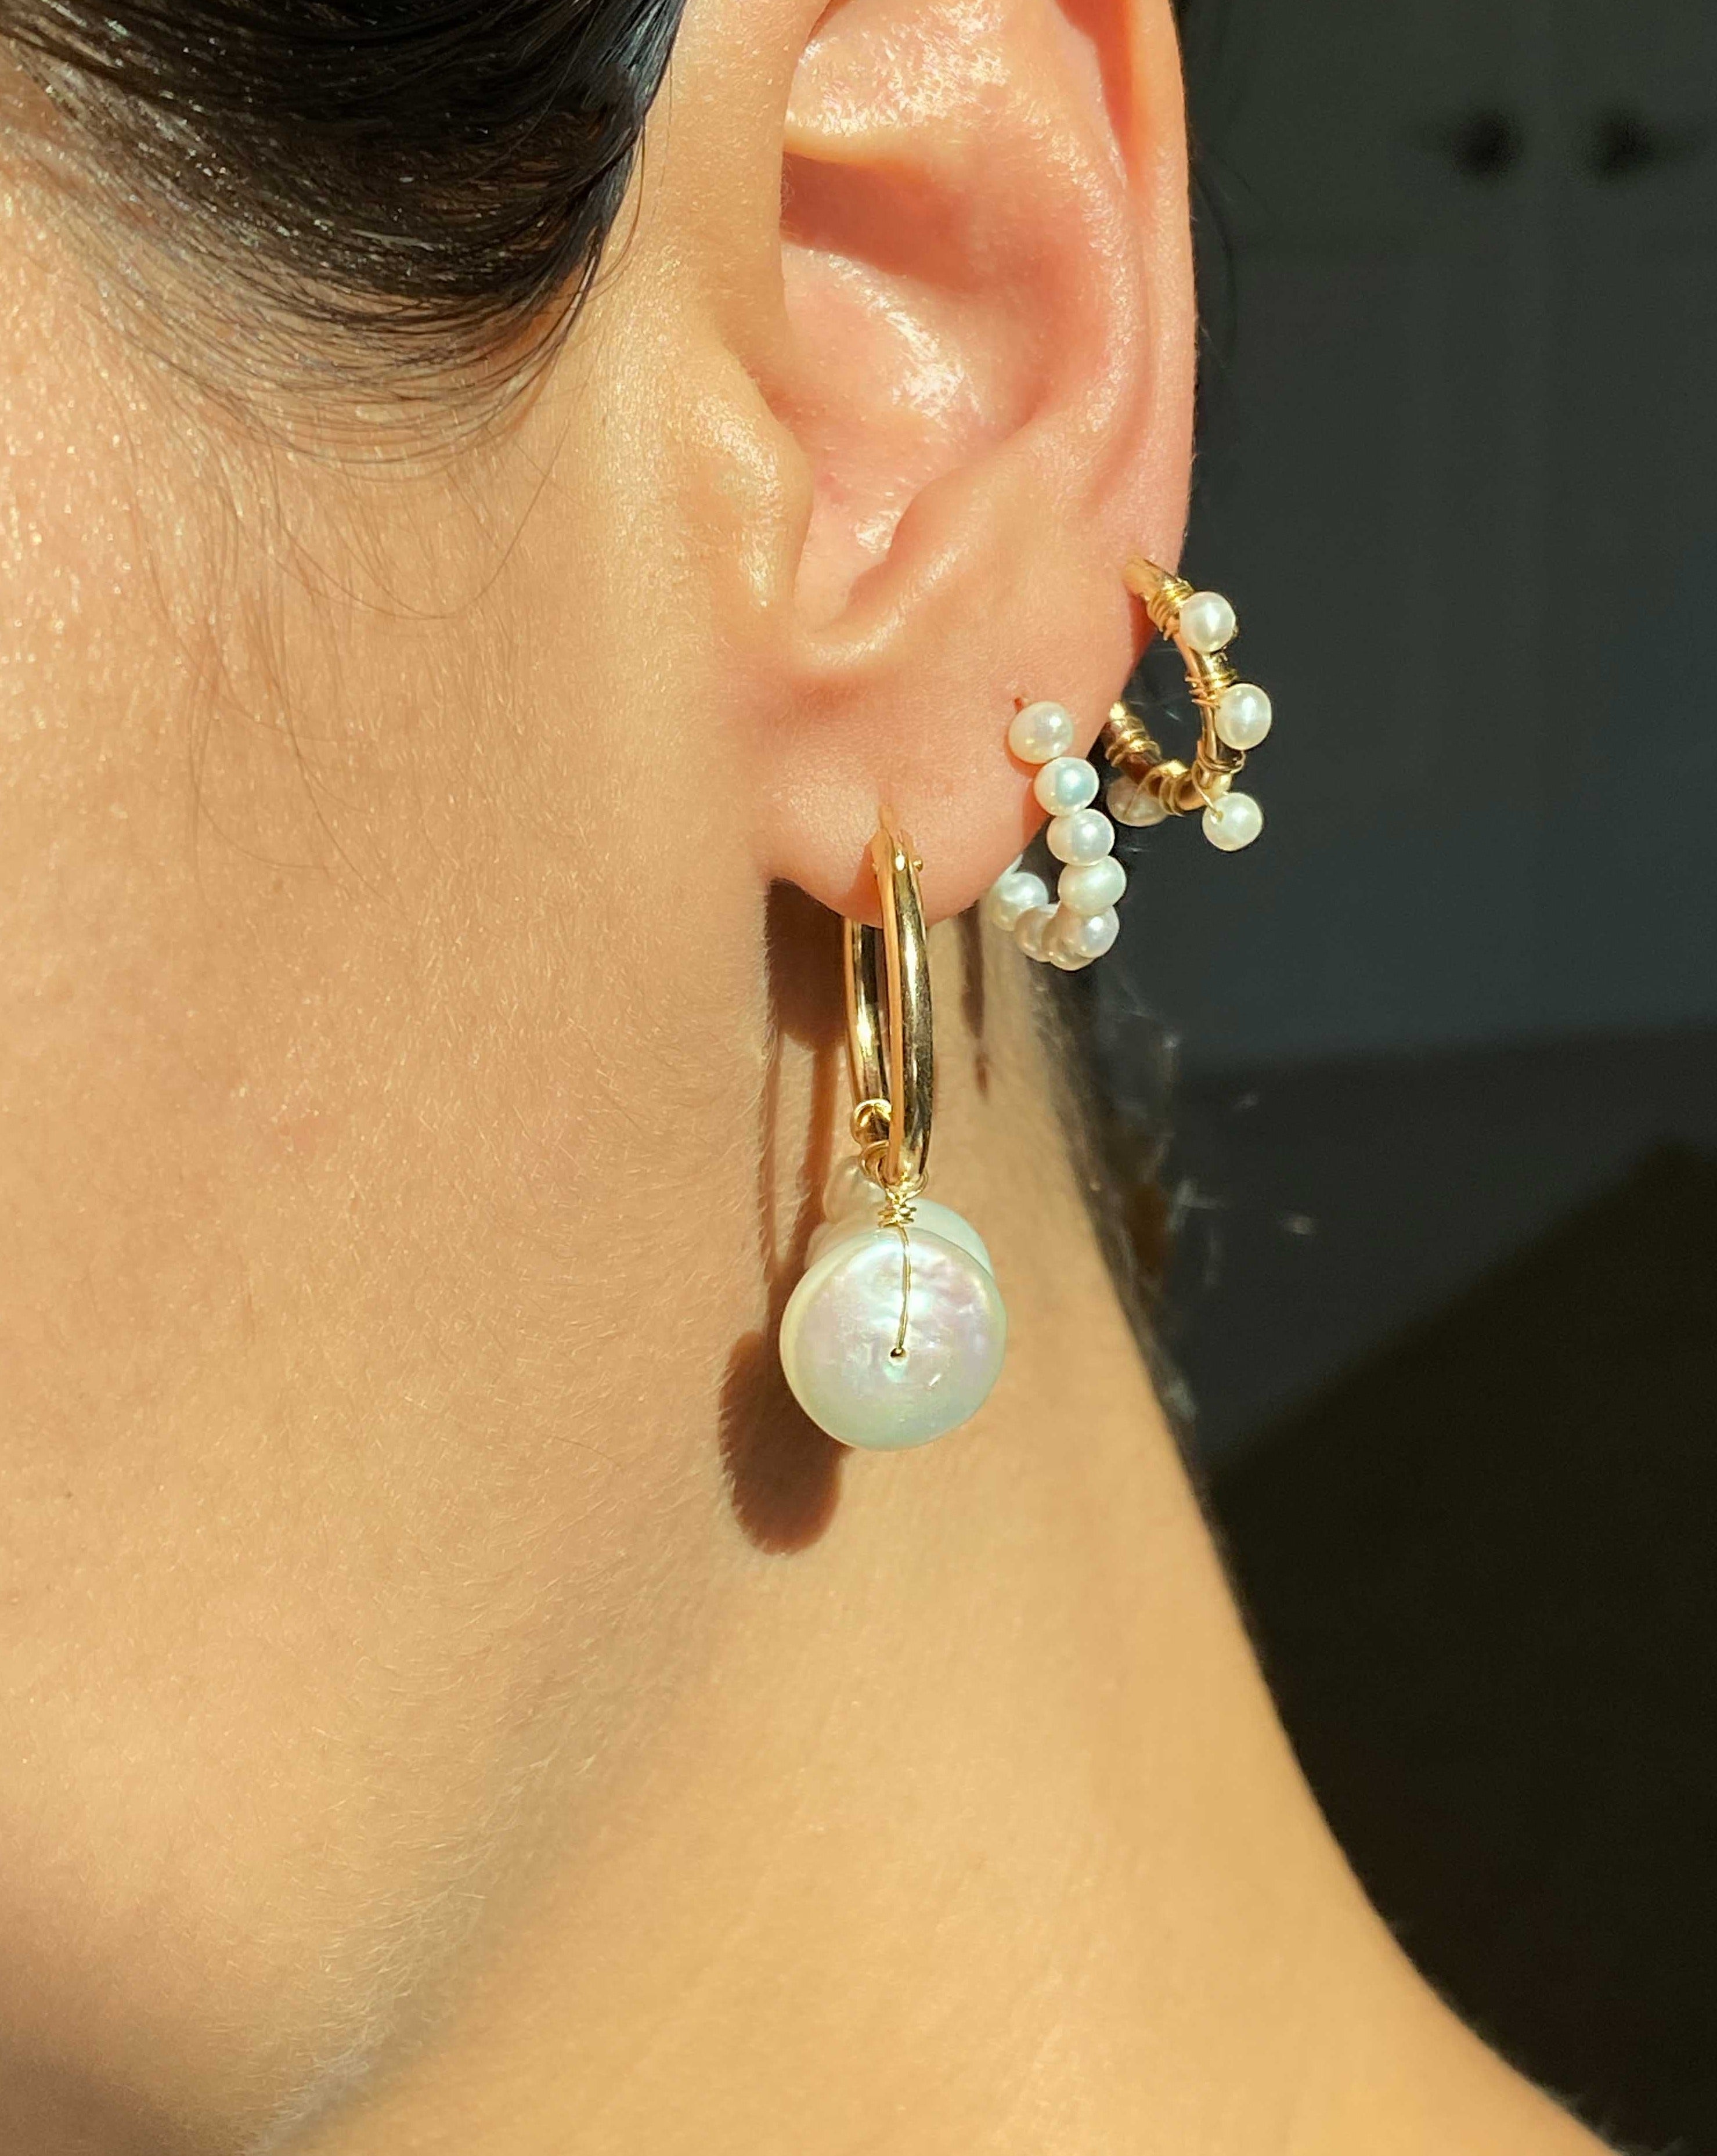 Lolo Hoops by KOZAKH. Stud earrings crafted in 14K Gold Filled, featuring 3mm white freshwater Pearls forming a hoop shape.